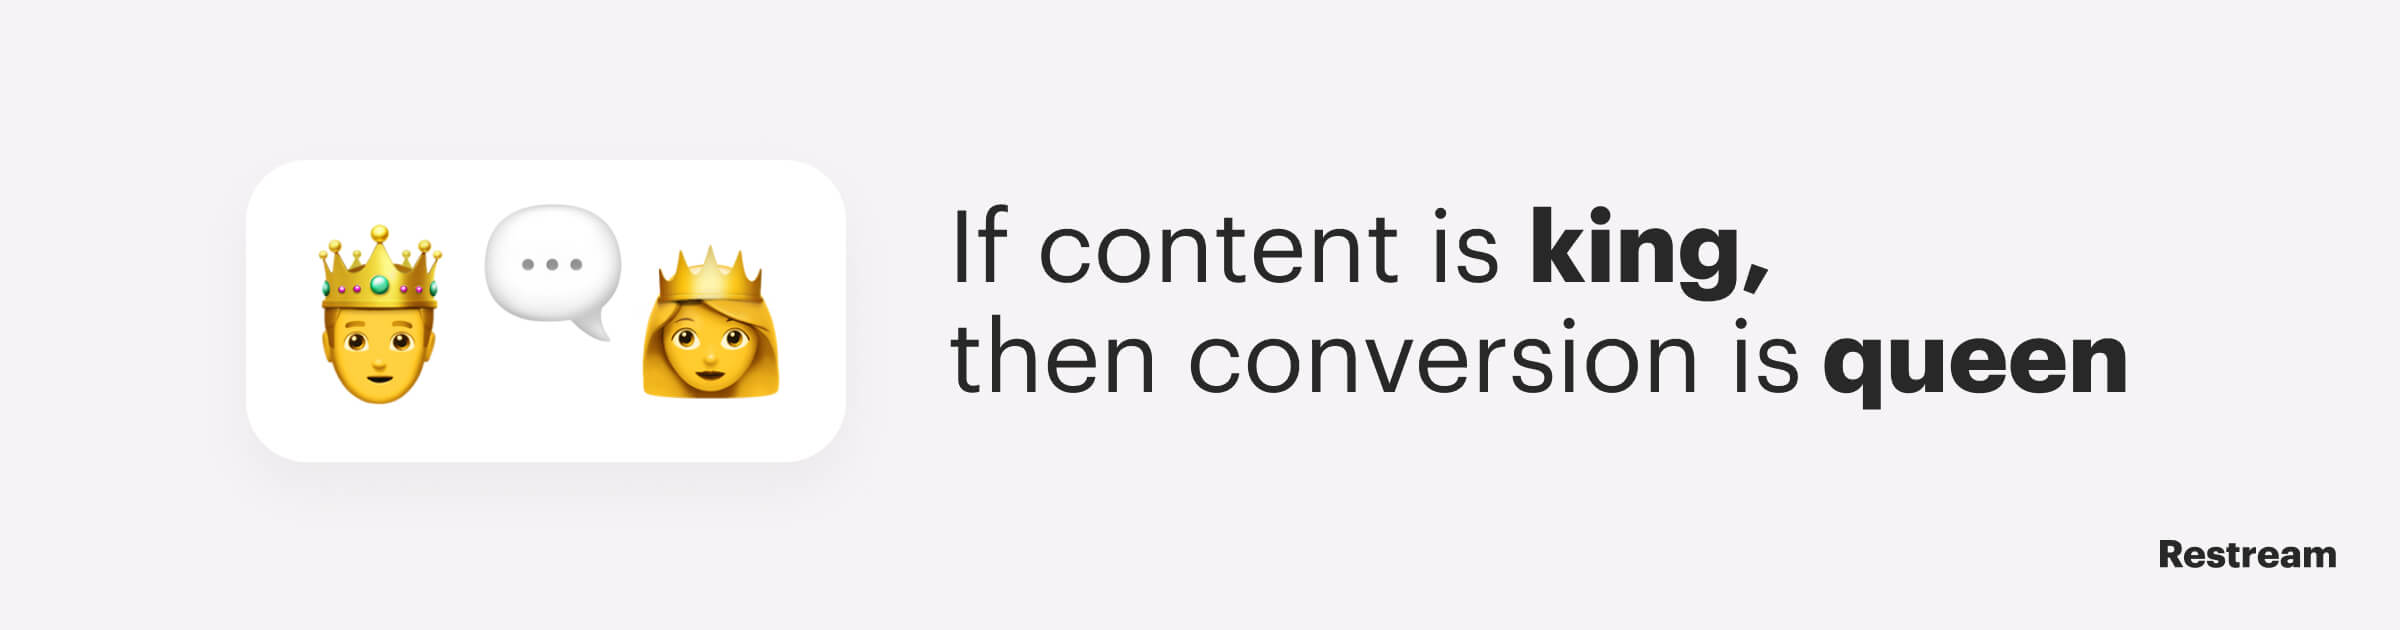 If content is king, then conversion is queen